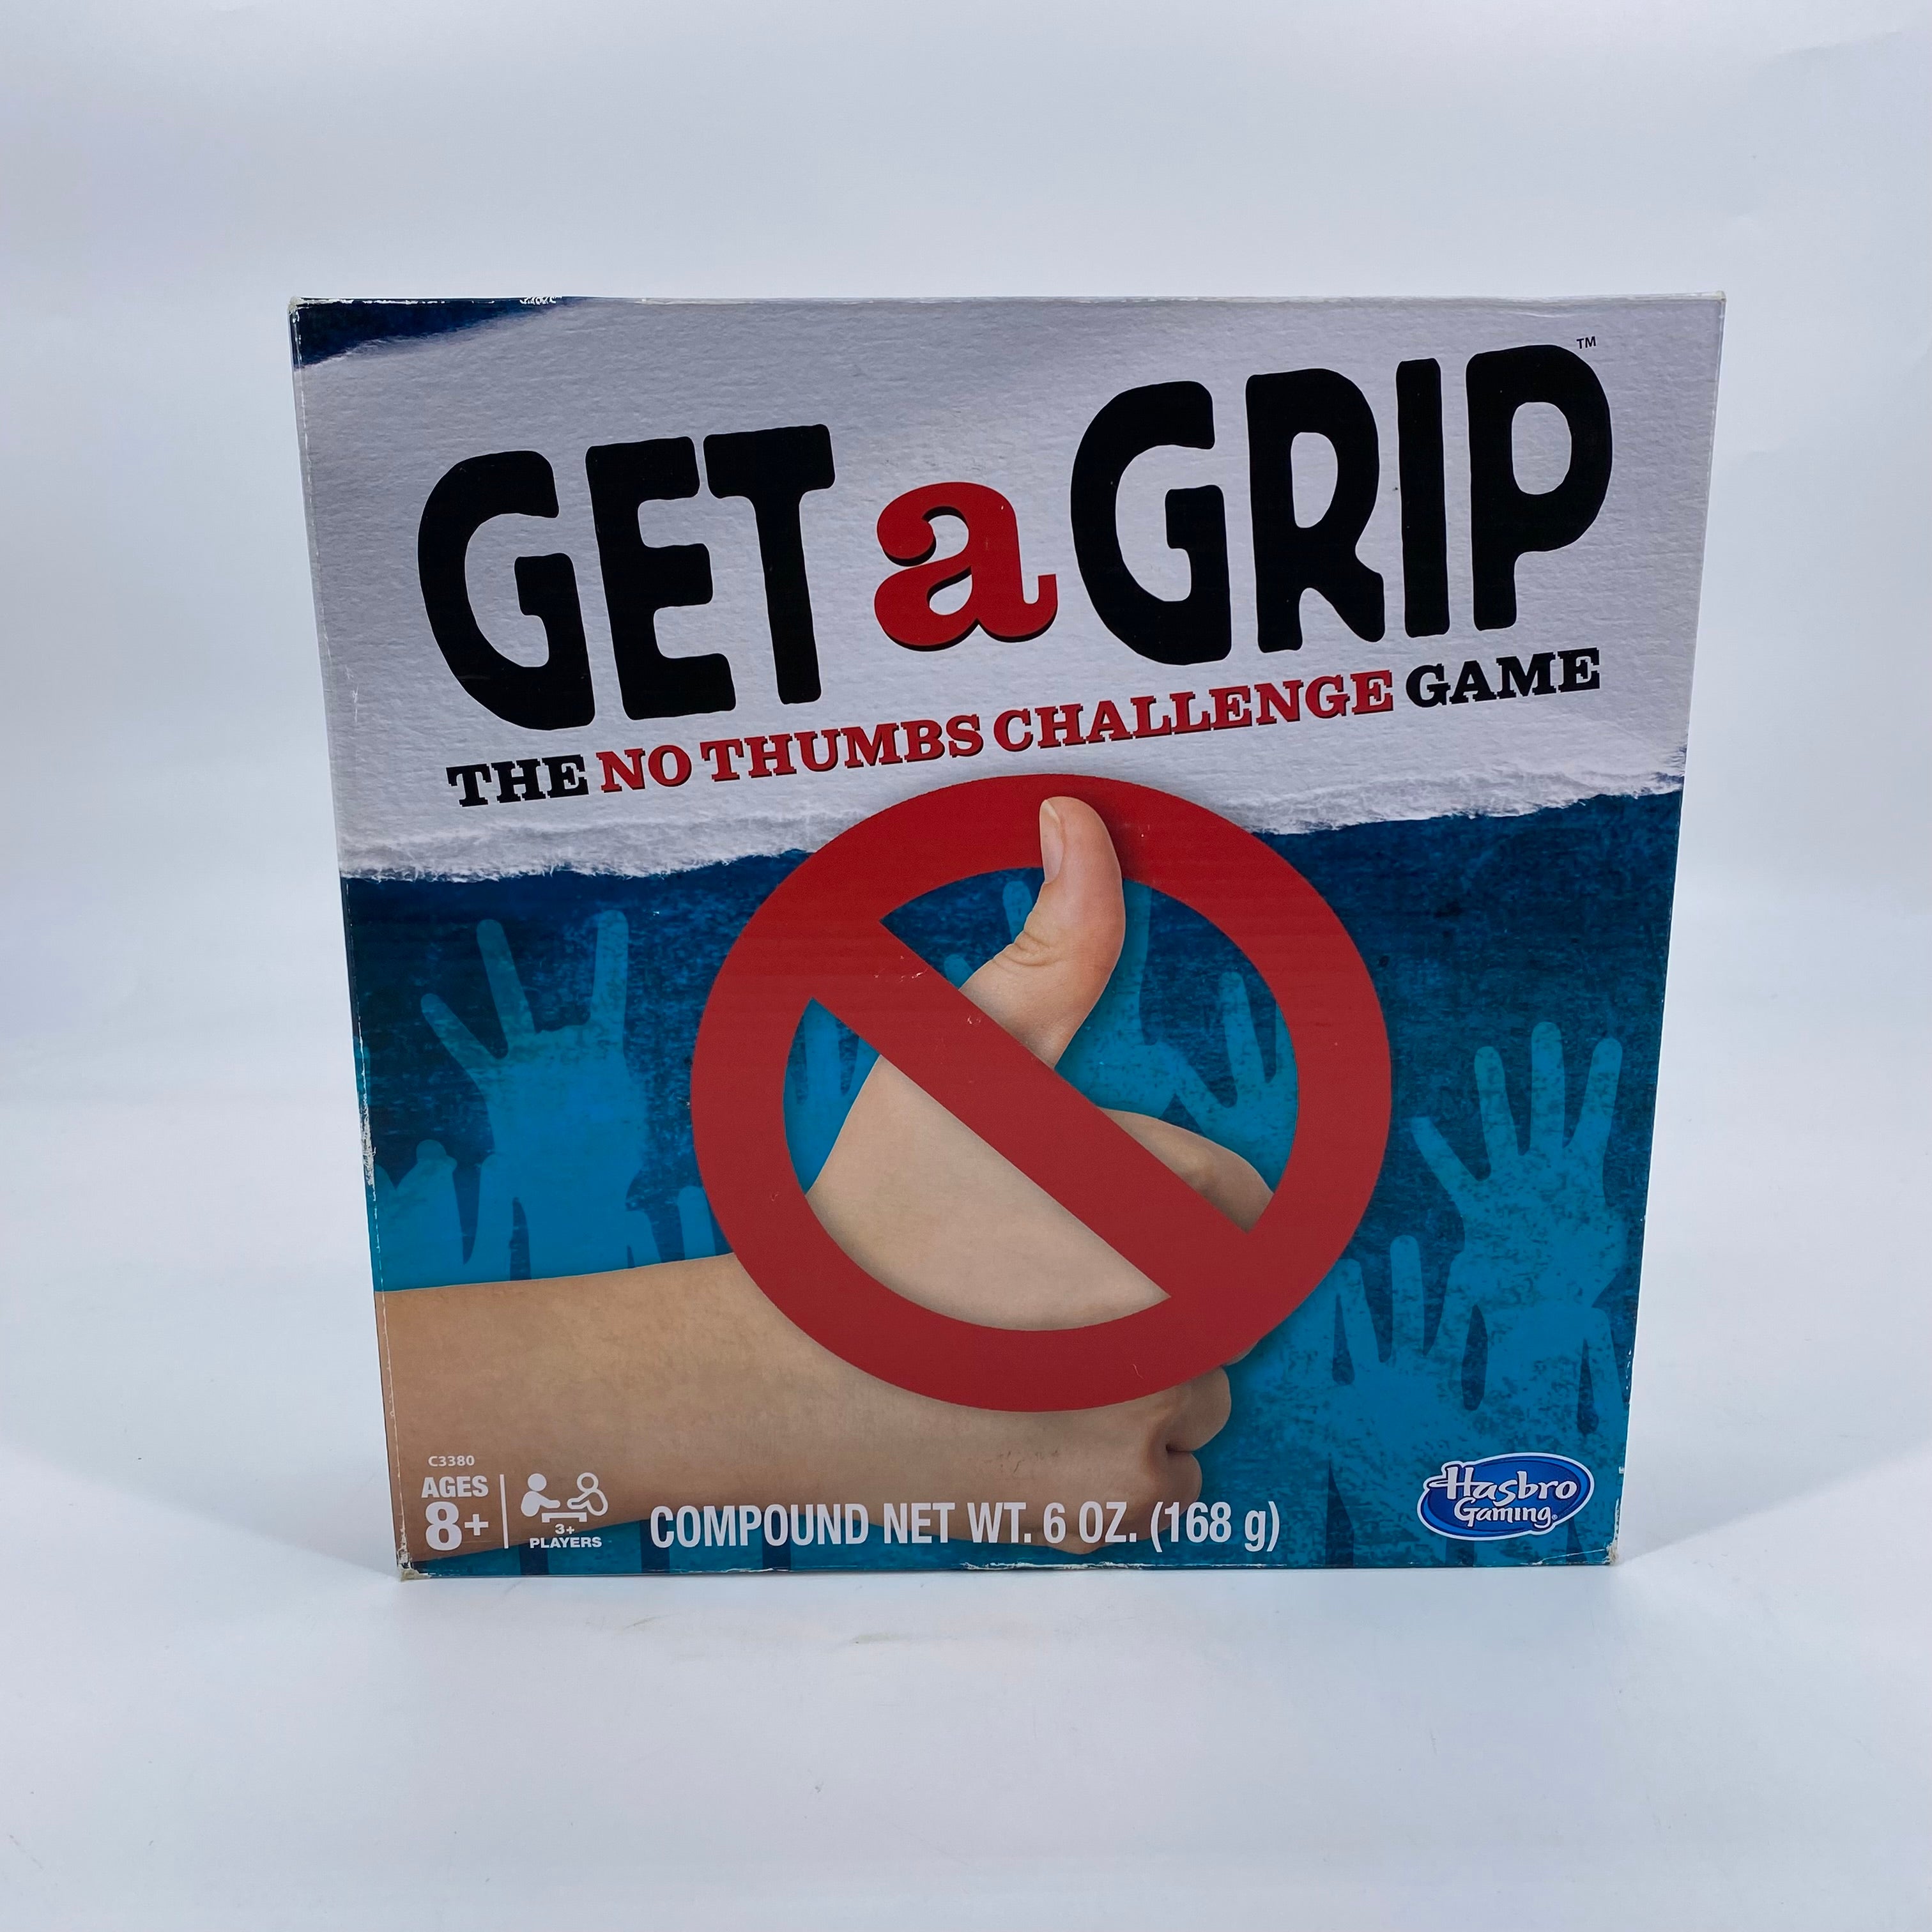 Get a grip - The no thumbs challenge game- Édition 2016